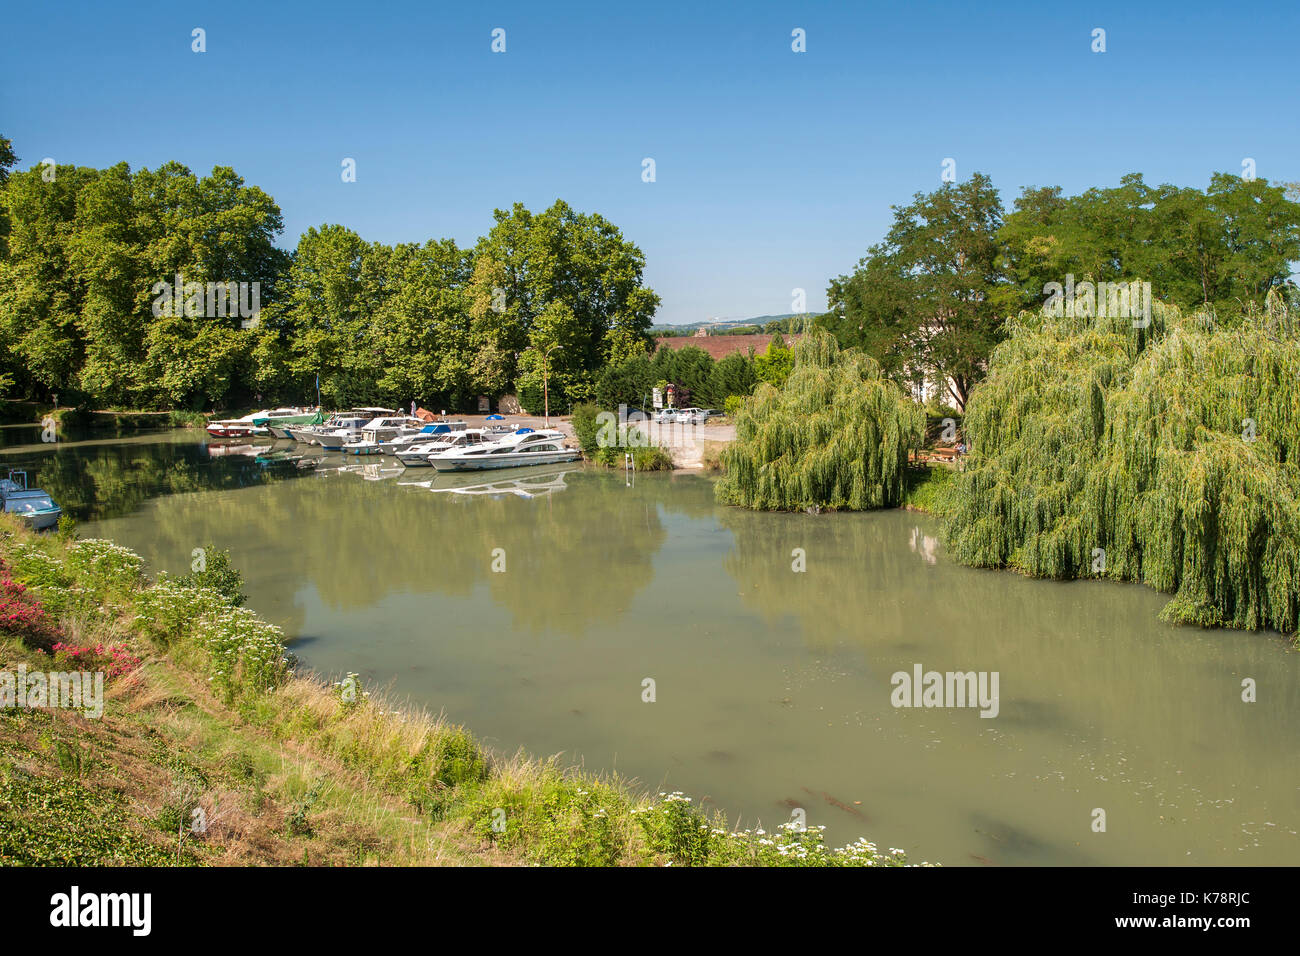 Canal boats berthed outside Damazan village on the canal latéral à la Garonne in the Dordogne region of southwest France. Stock Photo